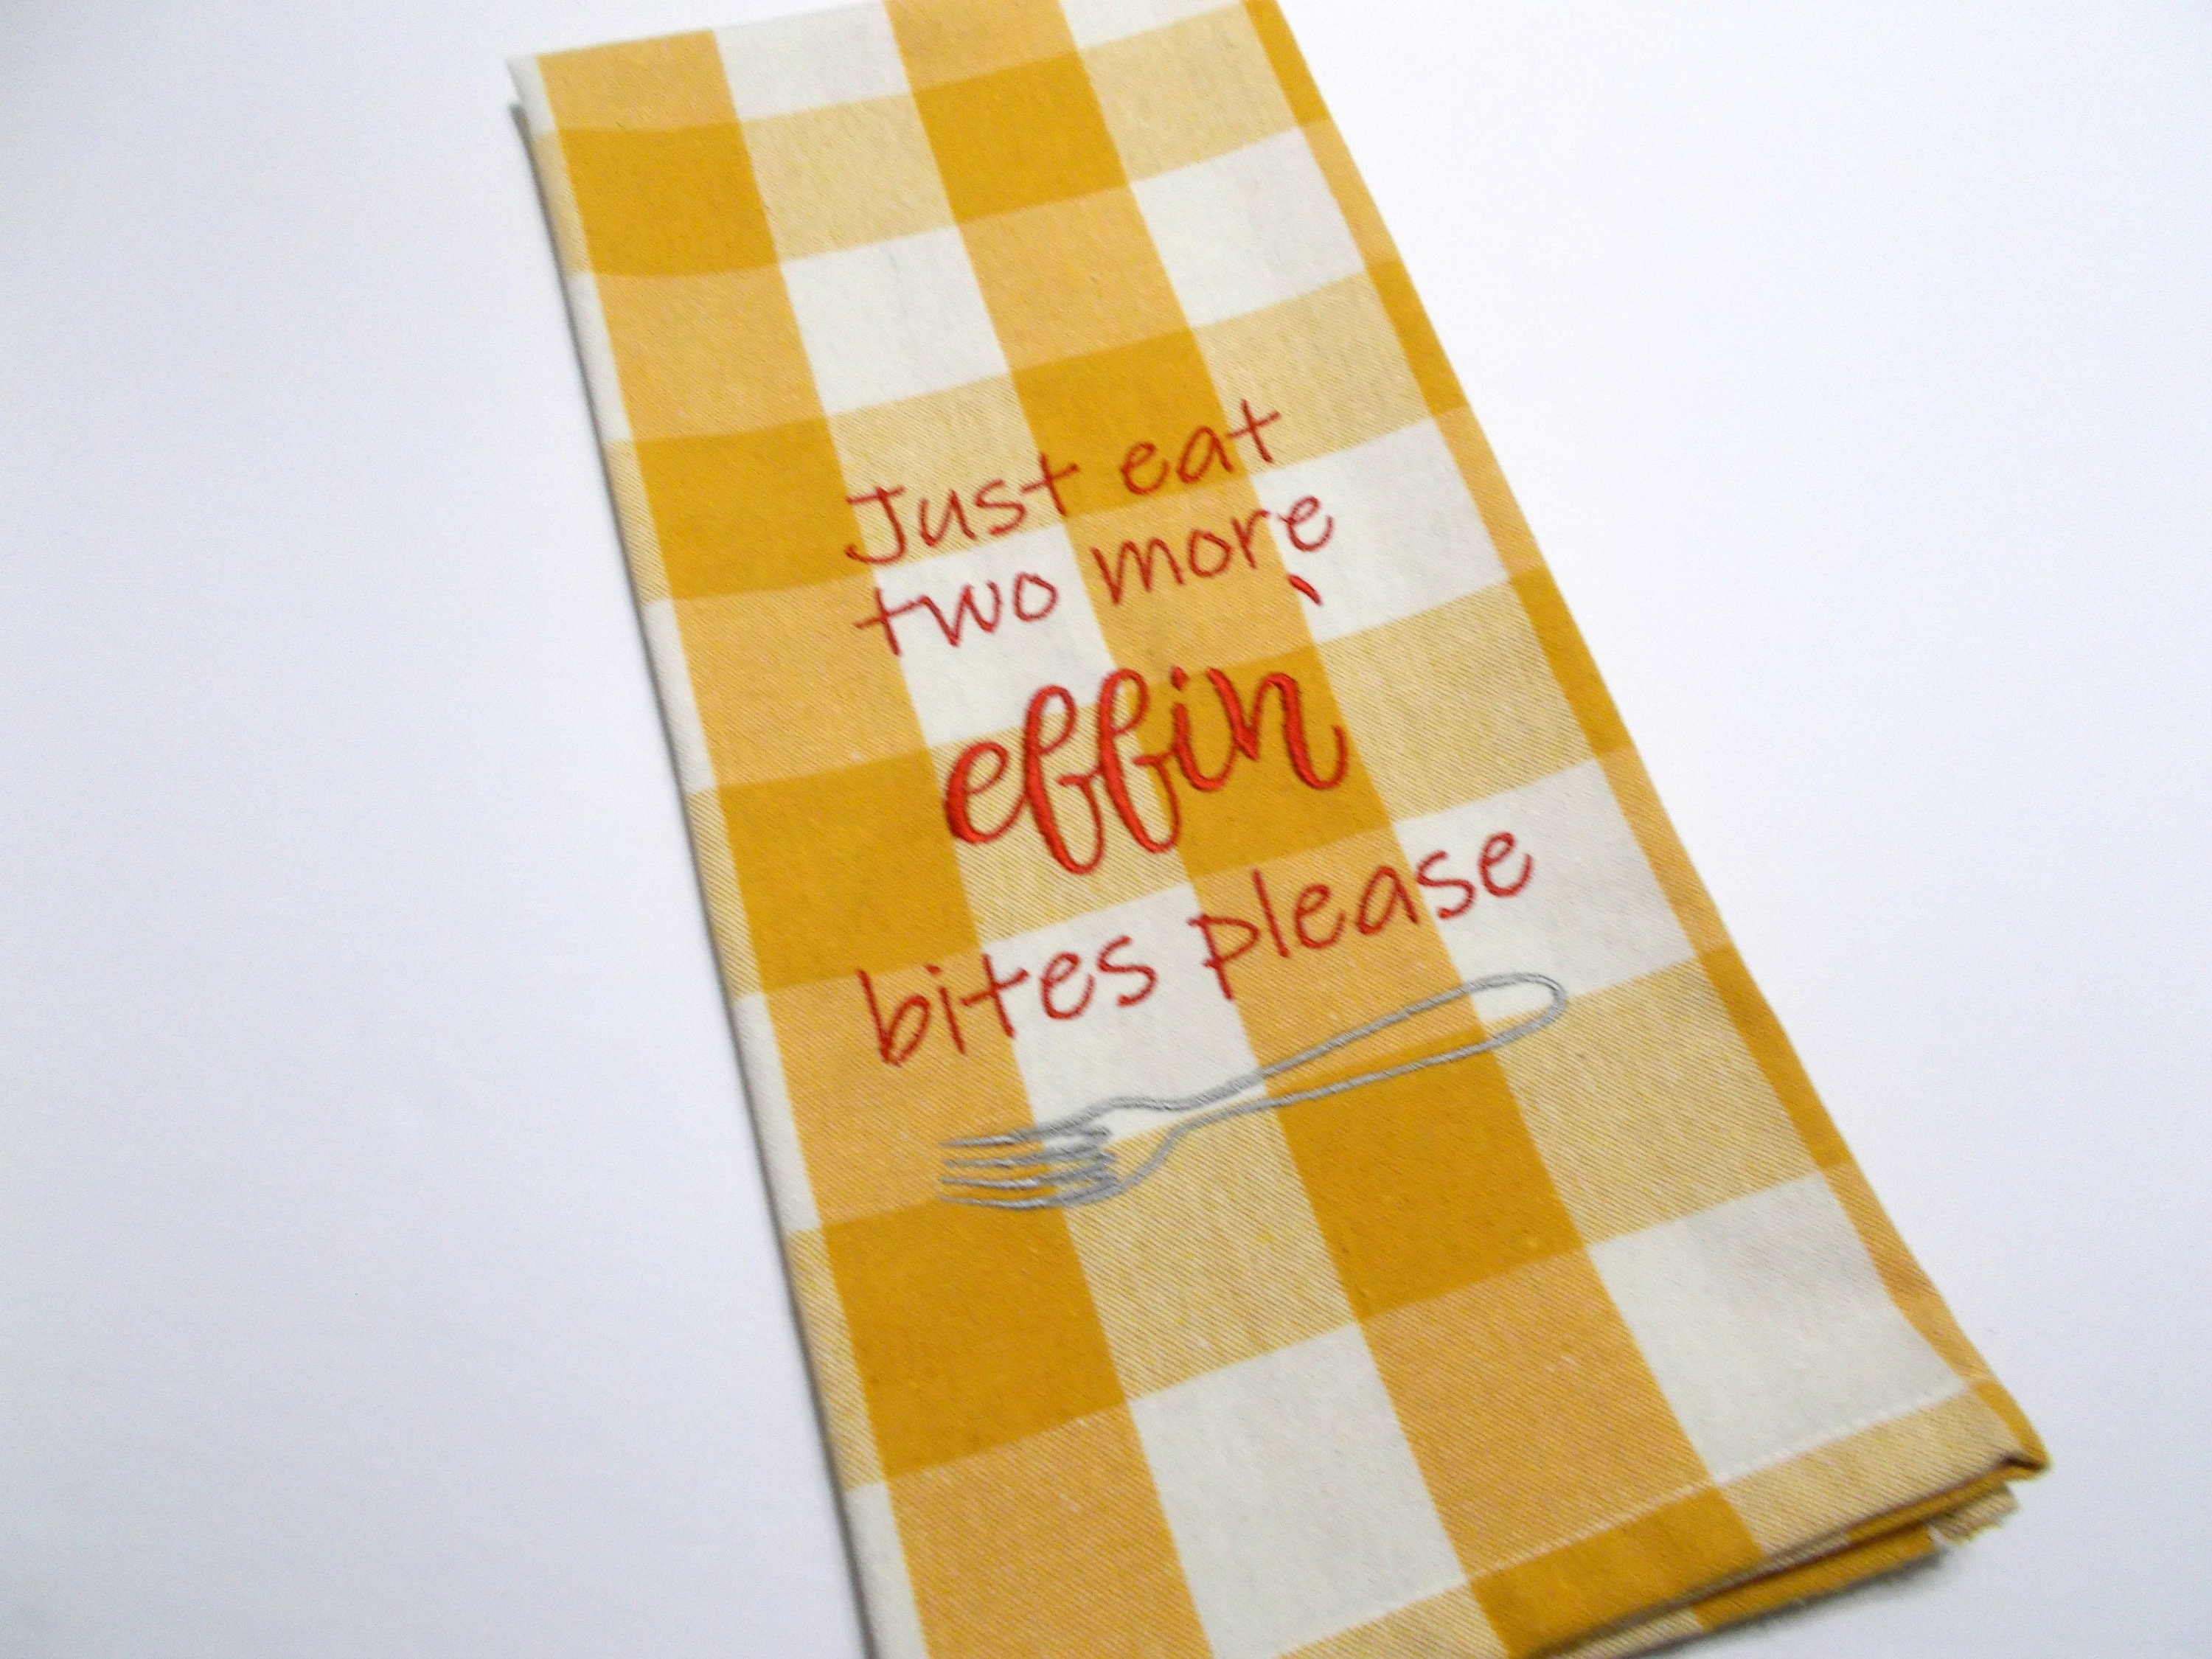 Instant Mom Add Coffee - Funny Kitchen Towels with Sayings, Funny